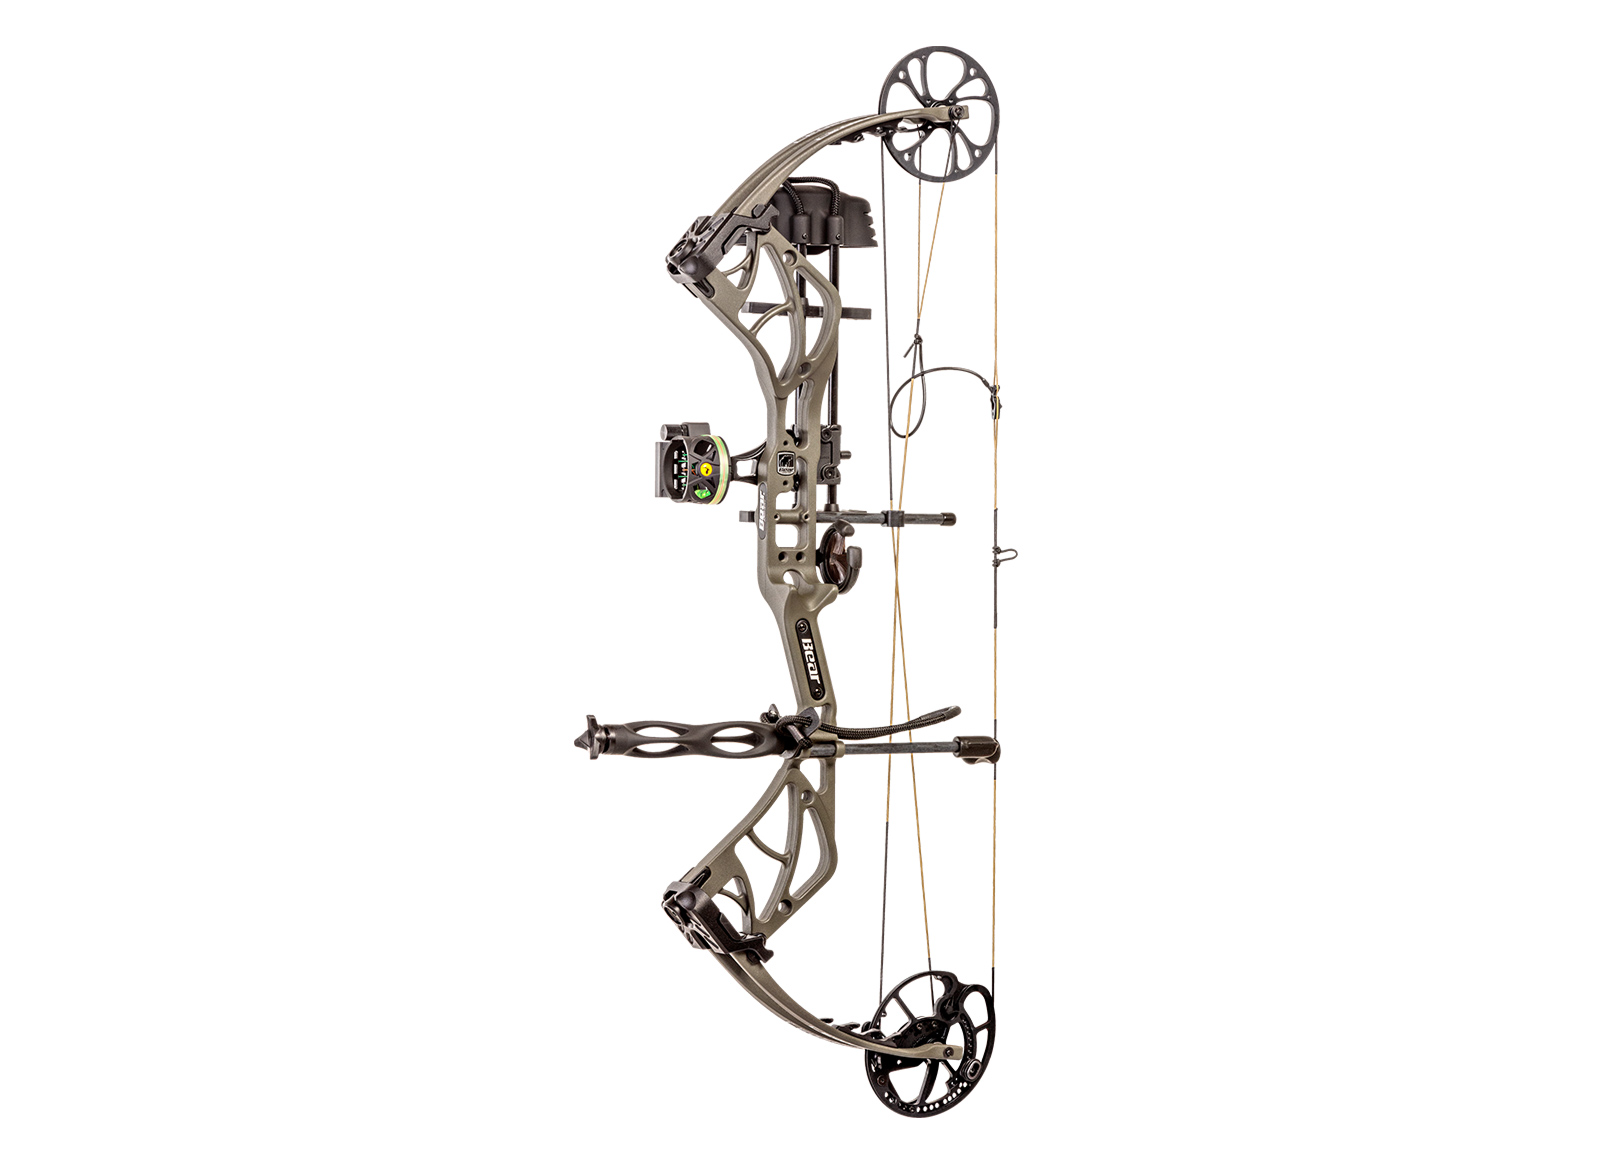 BEAR ARCHERY ARCO COMPOUND WHITETAIL LEGEND PACKAGE